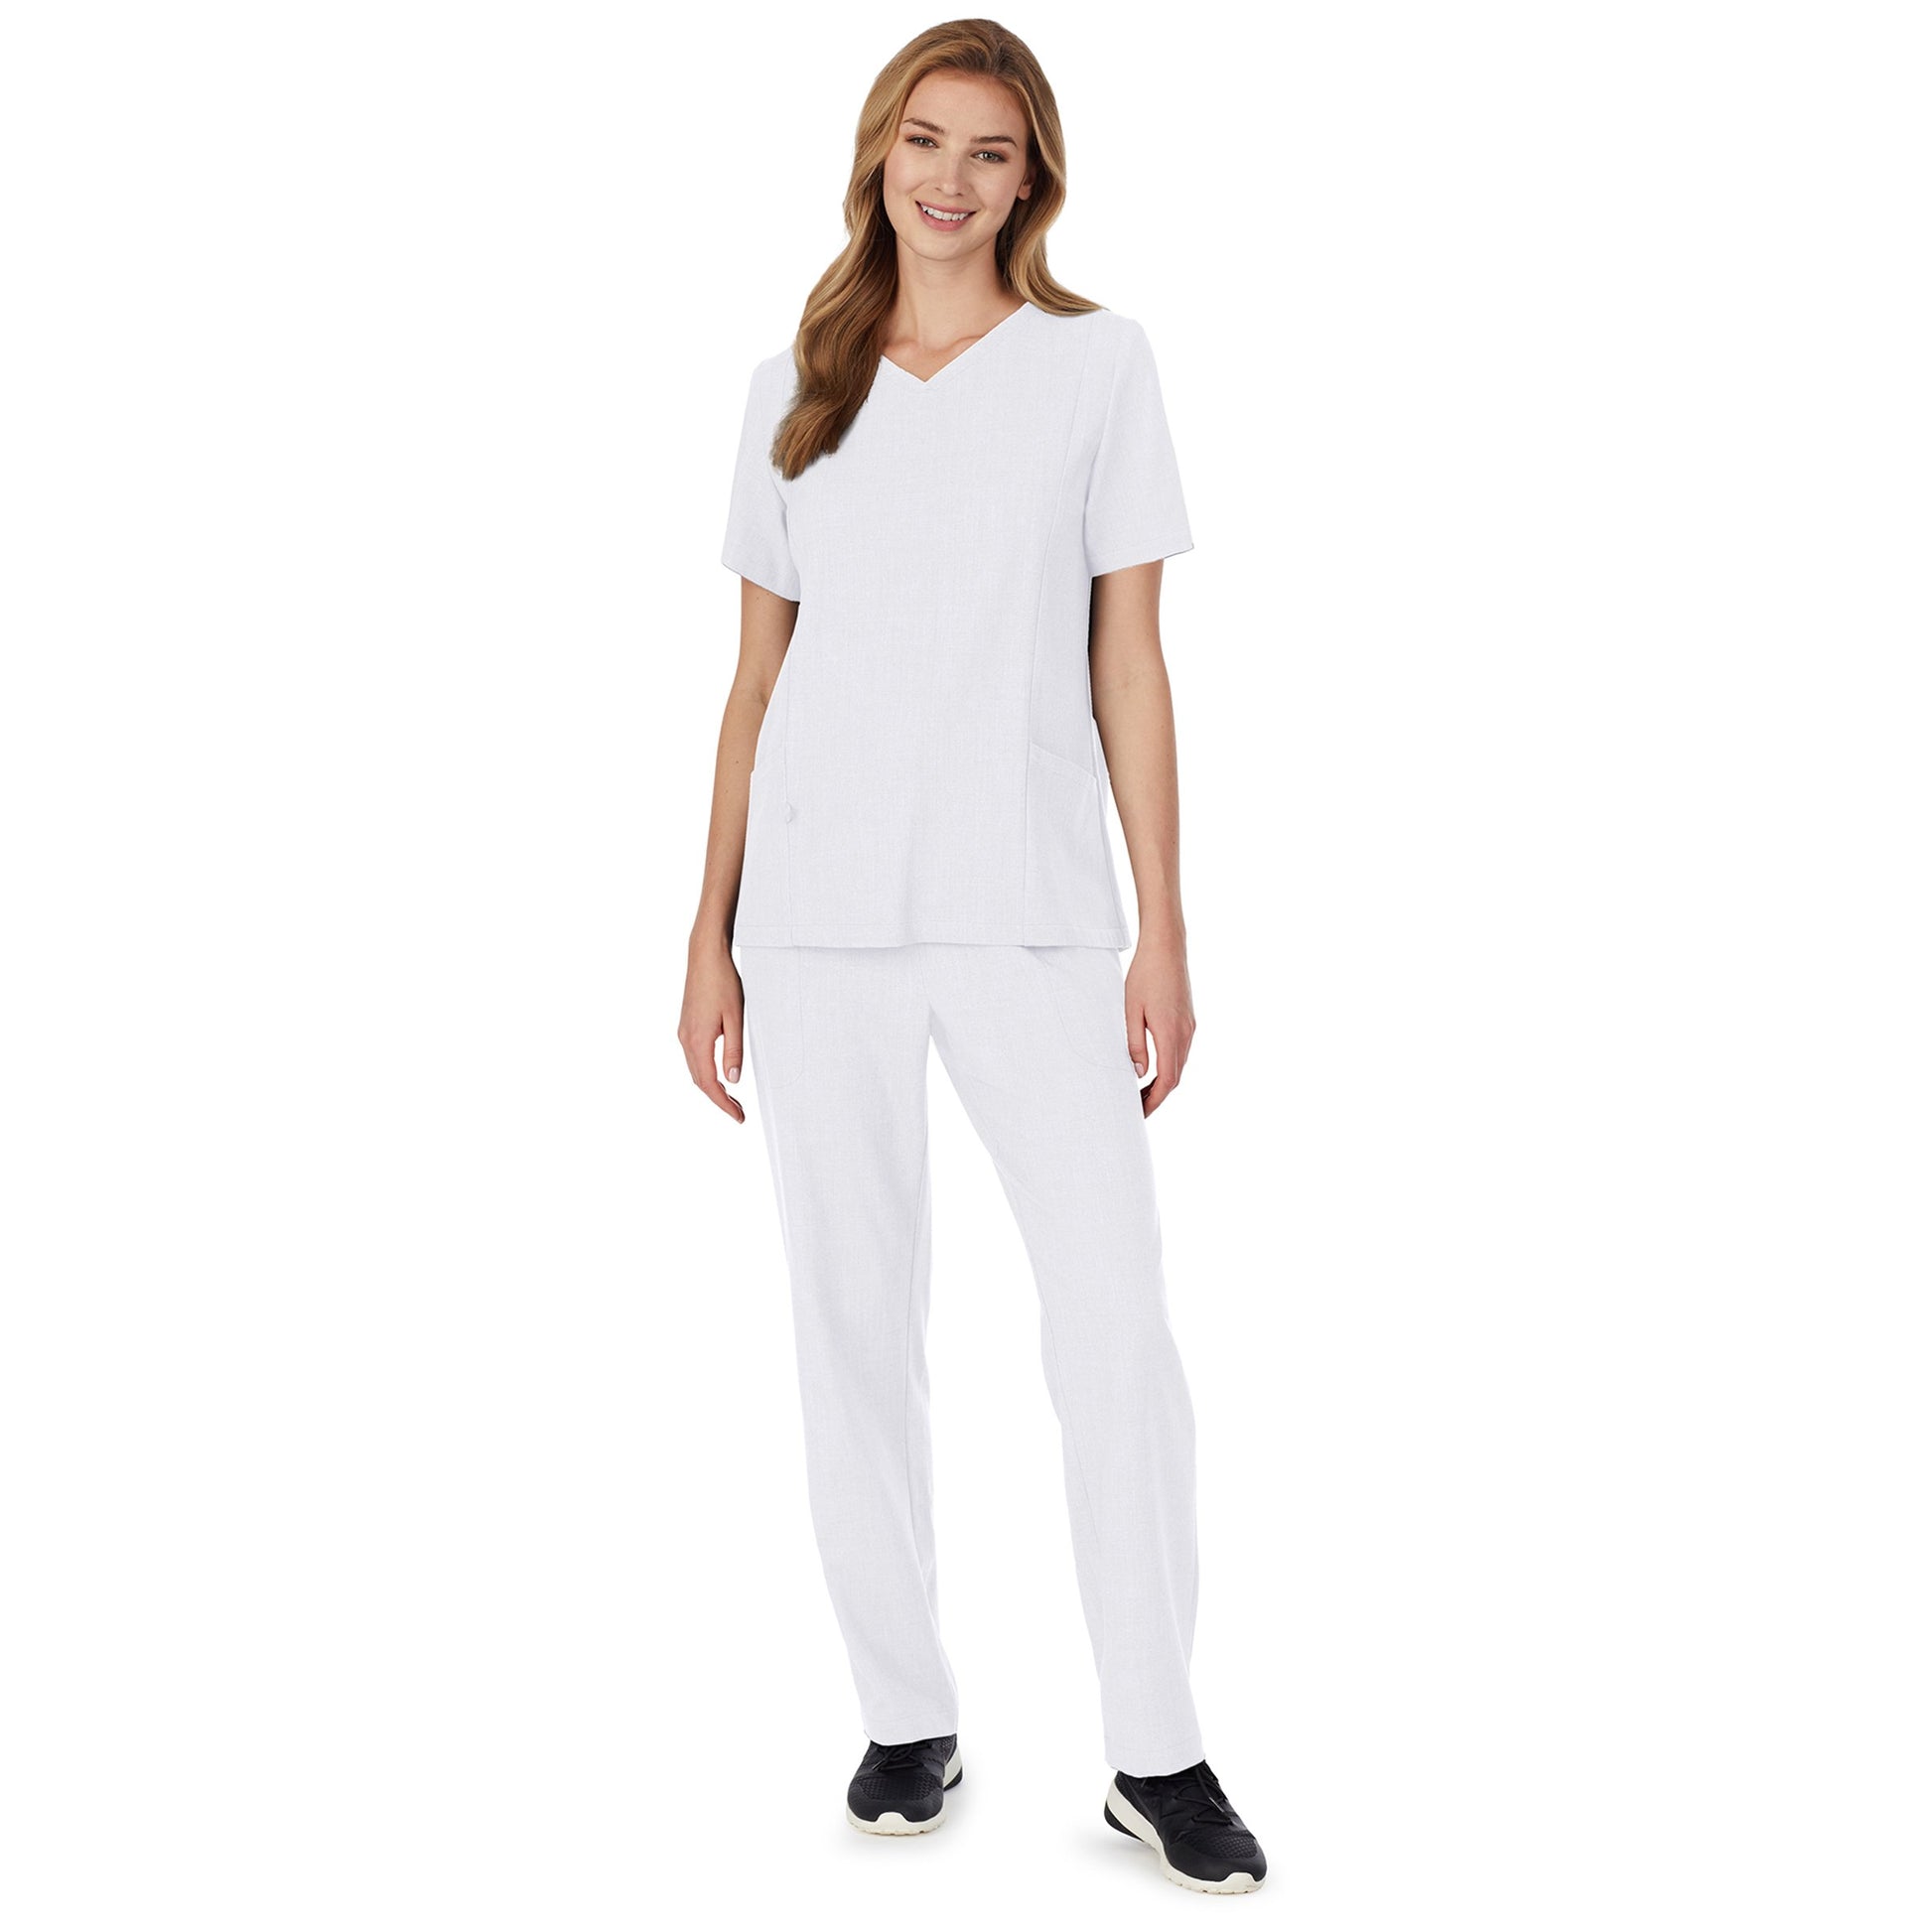 White;Model is wearing size S. She is 5’9”, Bust 32”, Waist 23", Hips 34.5”.@A lady wearing white scrub v-neck top with side pockets.